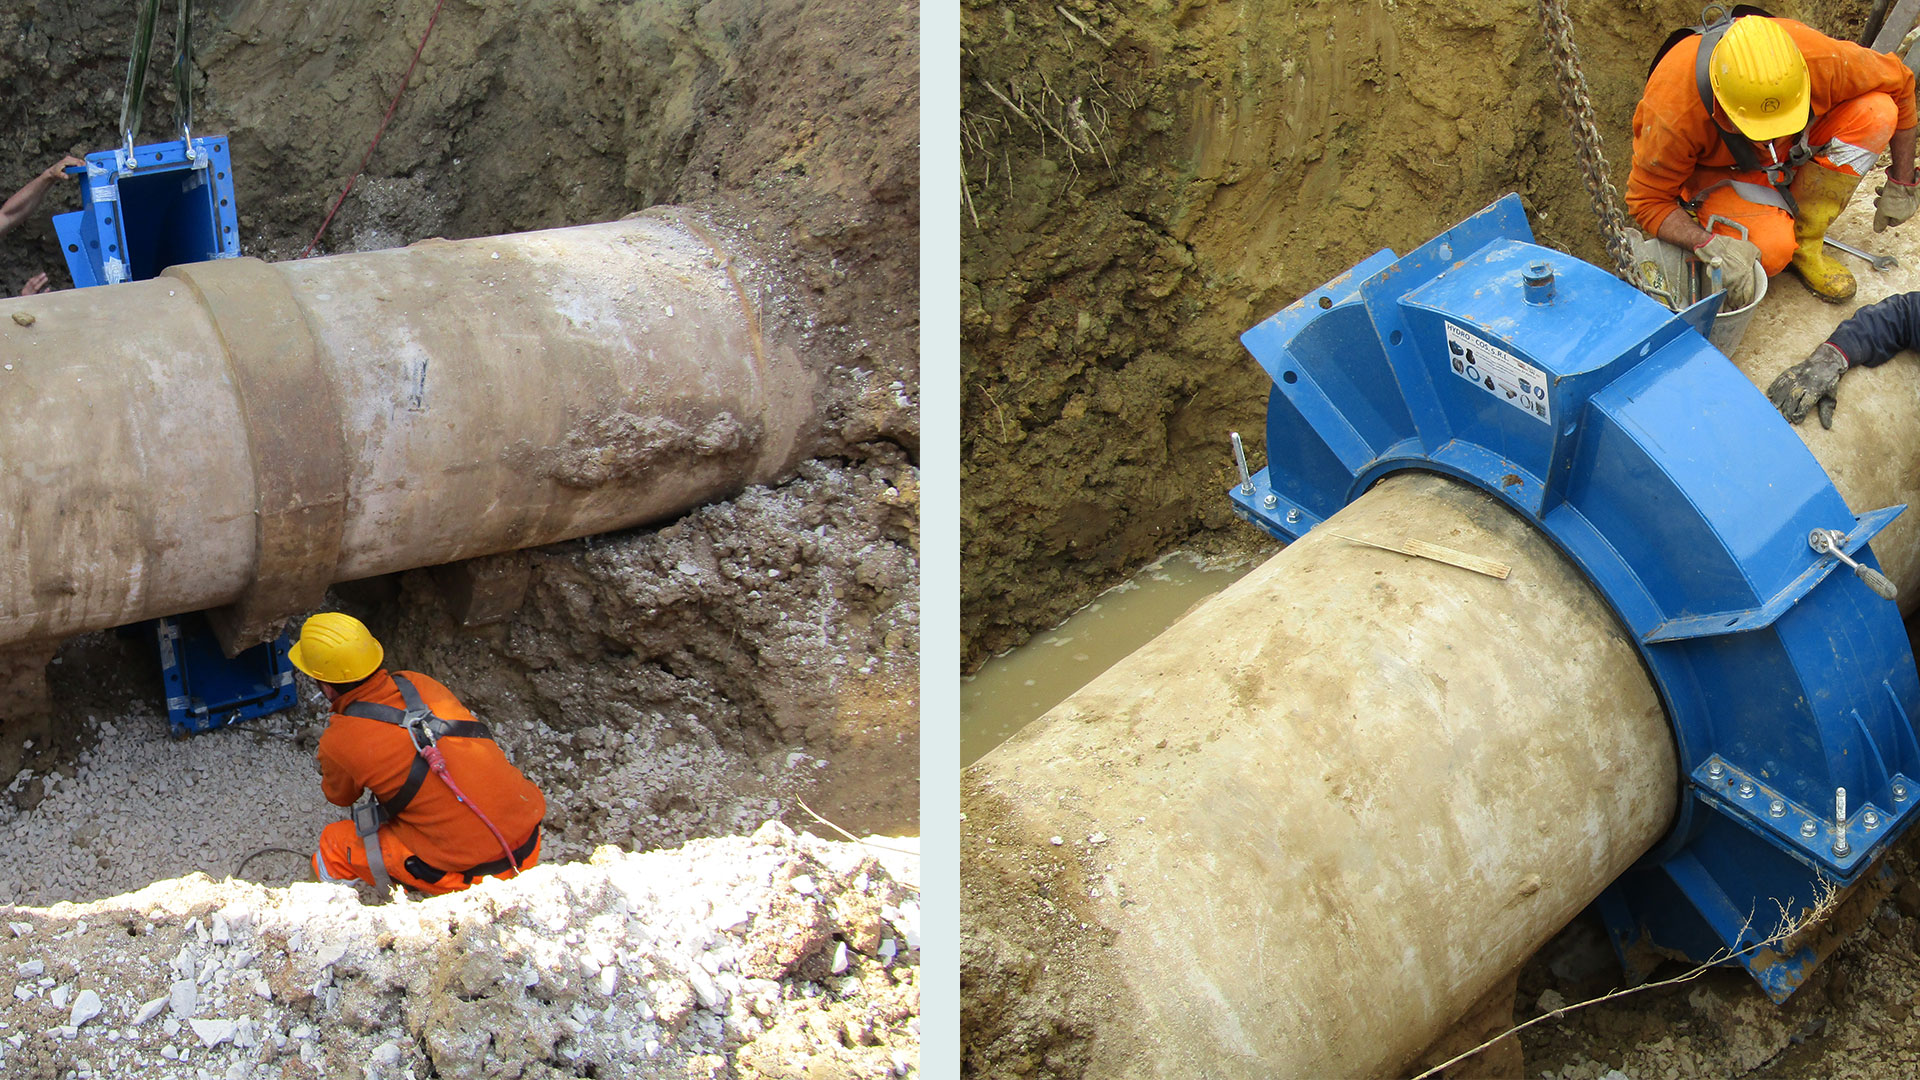 A Hydro Fast socket encapsulation collar was used for repairing leaking socket joint on old and fragile concrete pipeline located in the Lecce district in Puglia, Southern Italy.